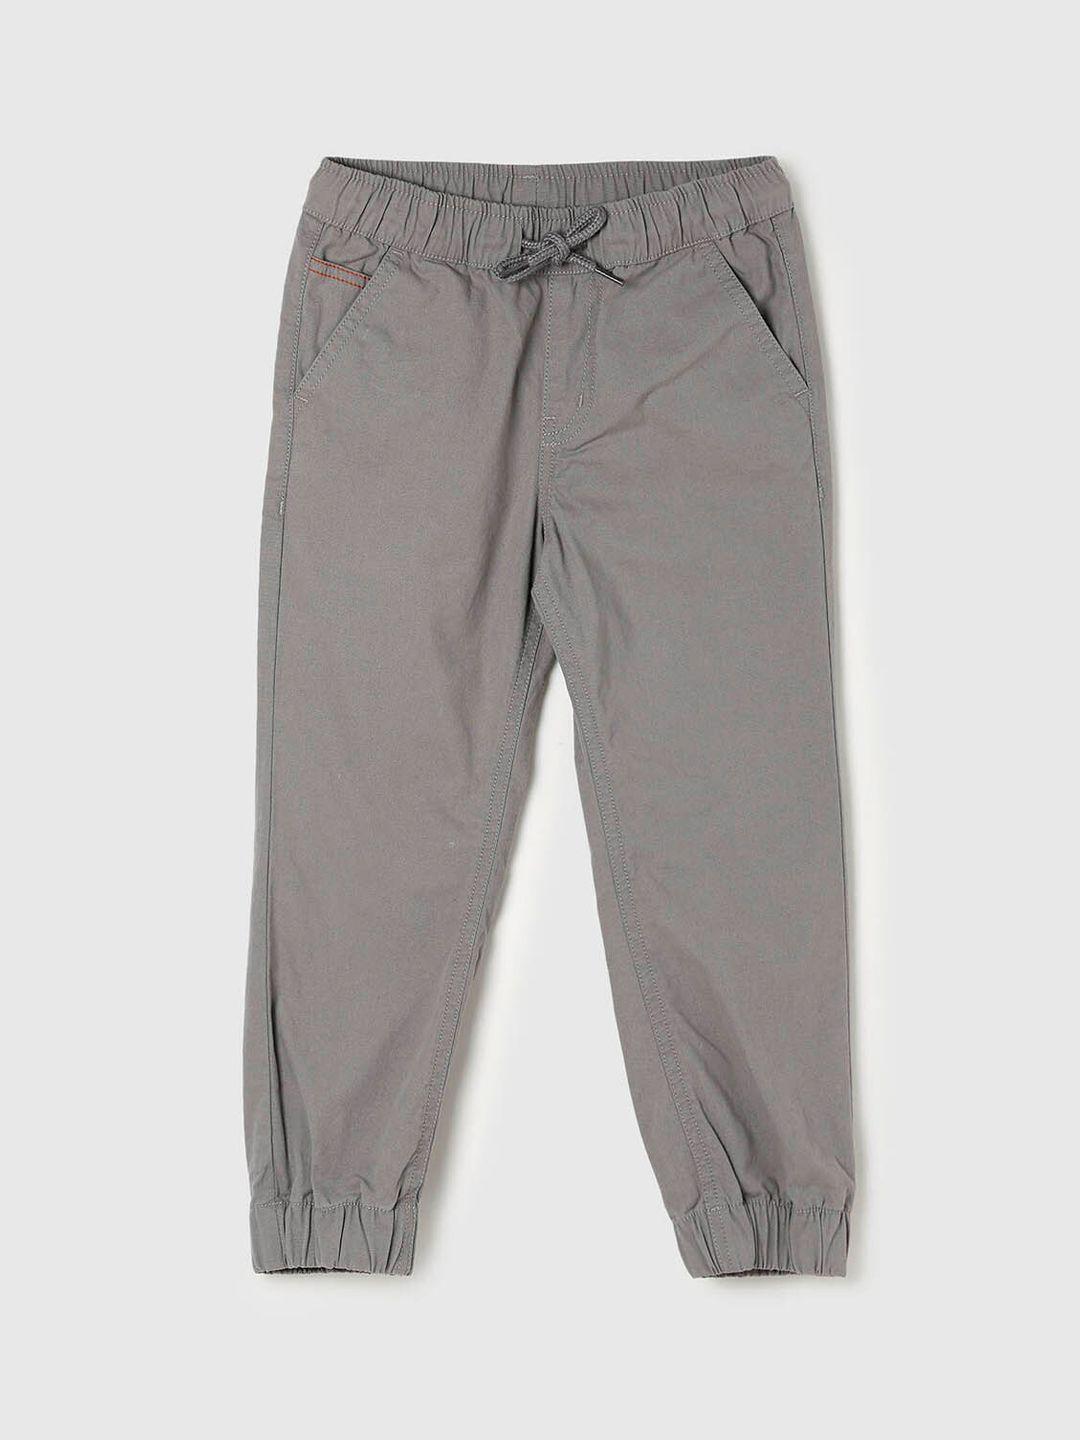 max boys grey joggers trousers